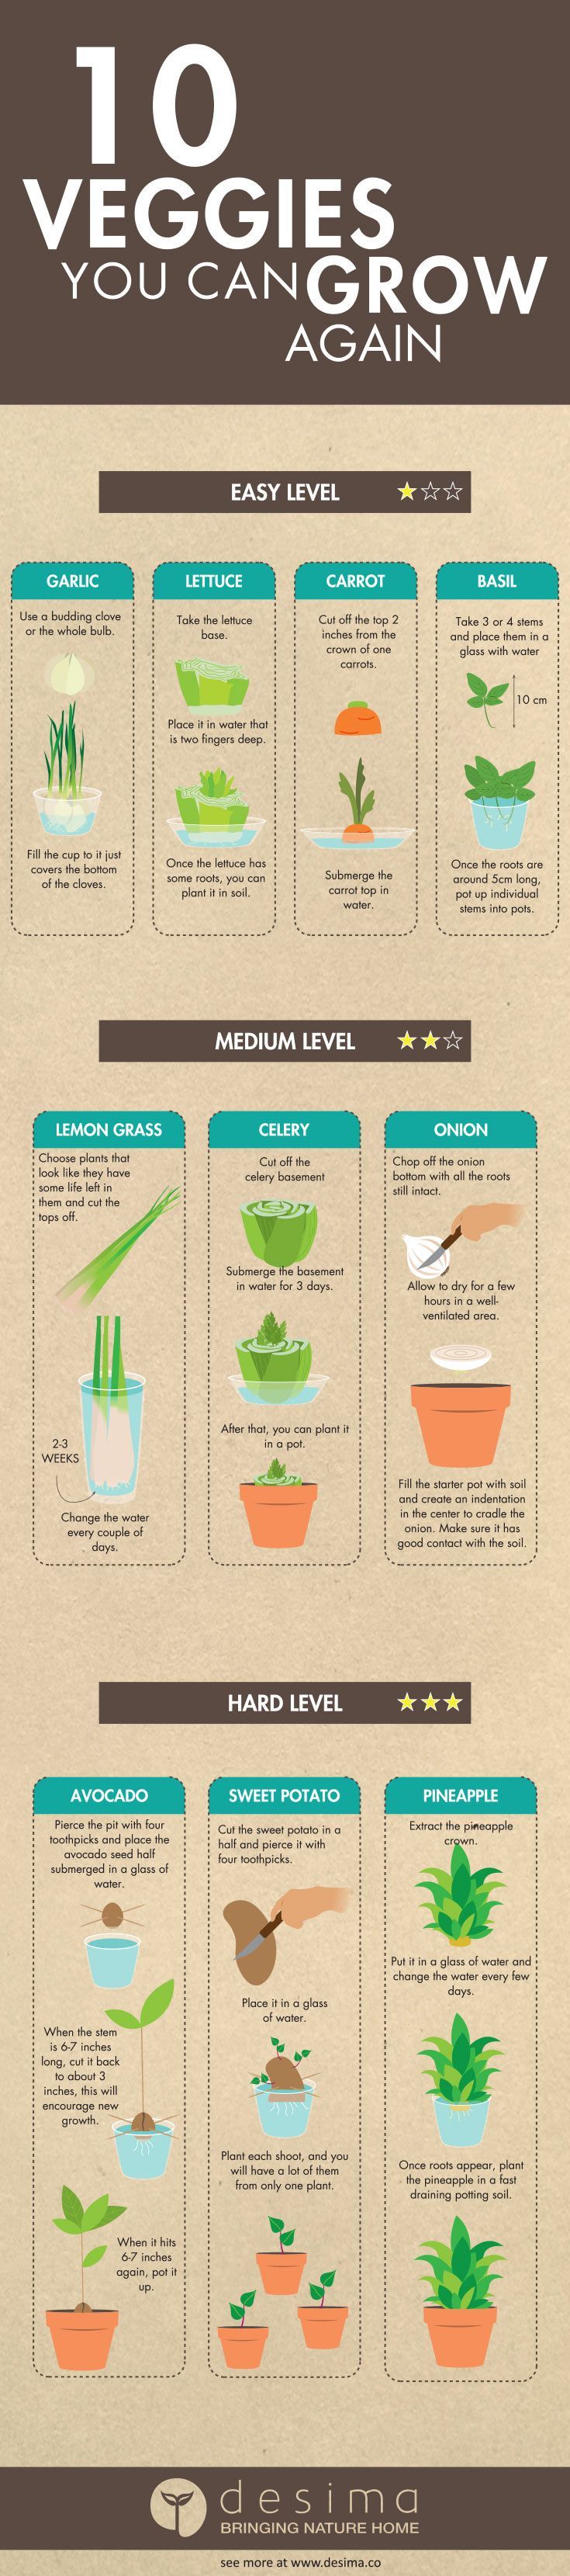 Infographic on veggies you can grow again